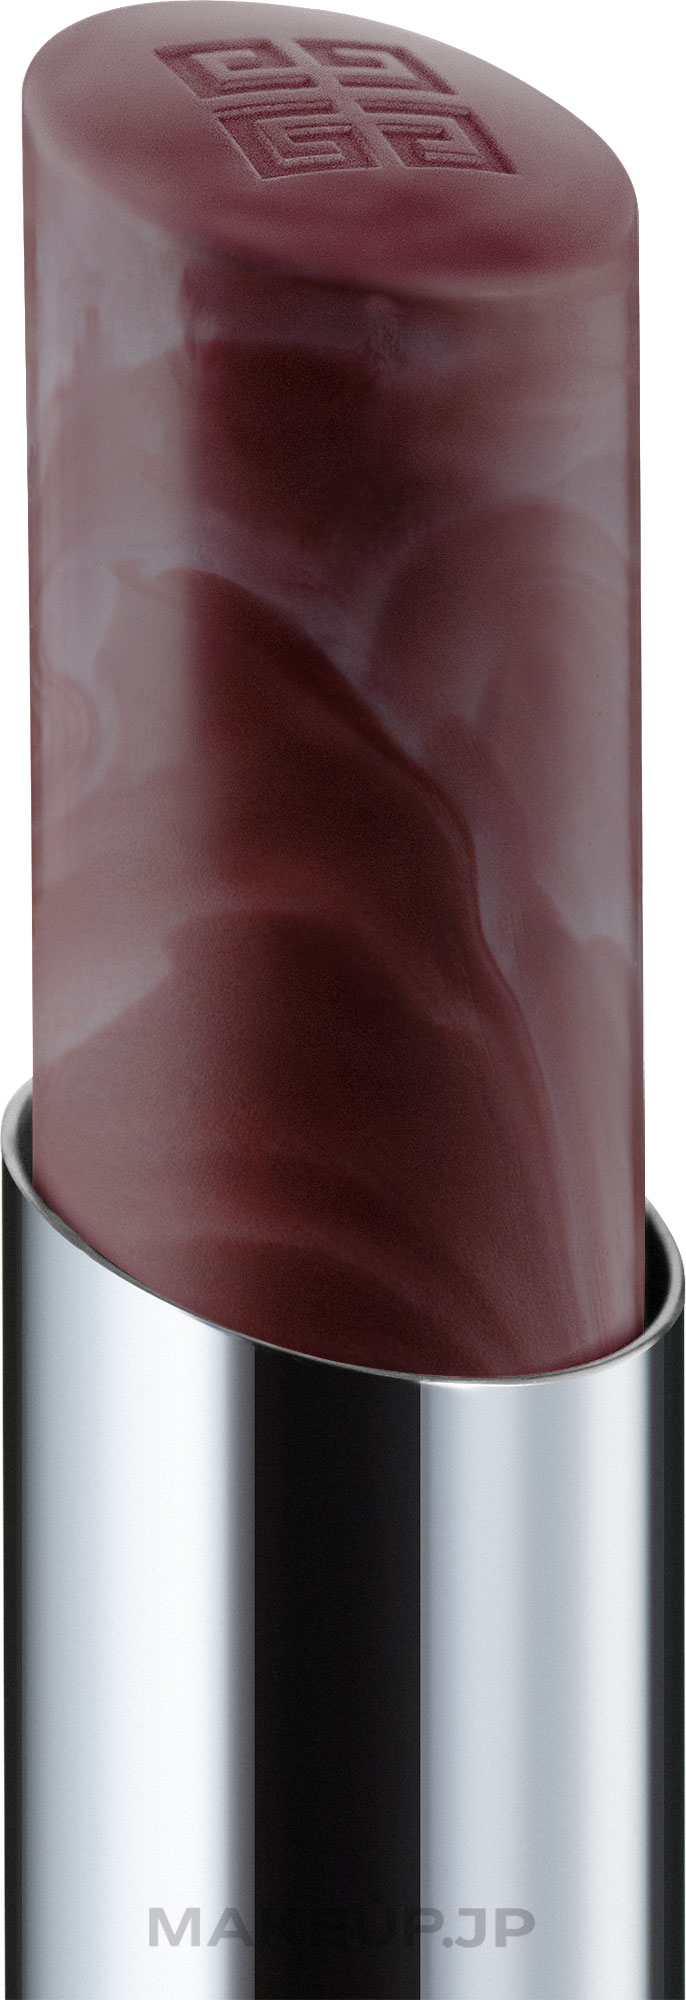 Moisturizing Lip Balm - Givenchy Le Rose Perfecto Baume — photo 117 - Chilling Brown